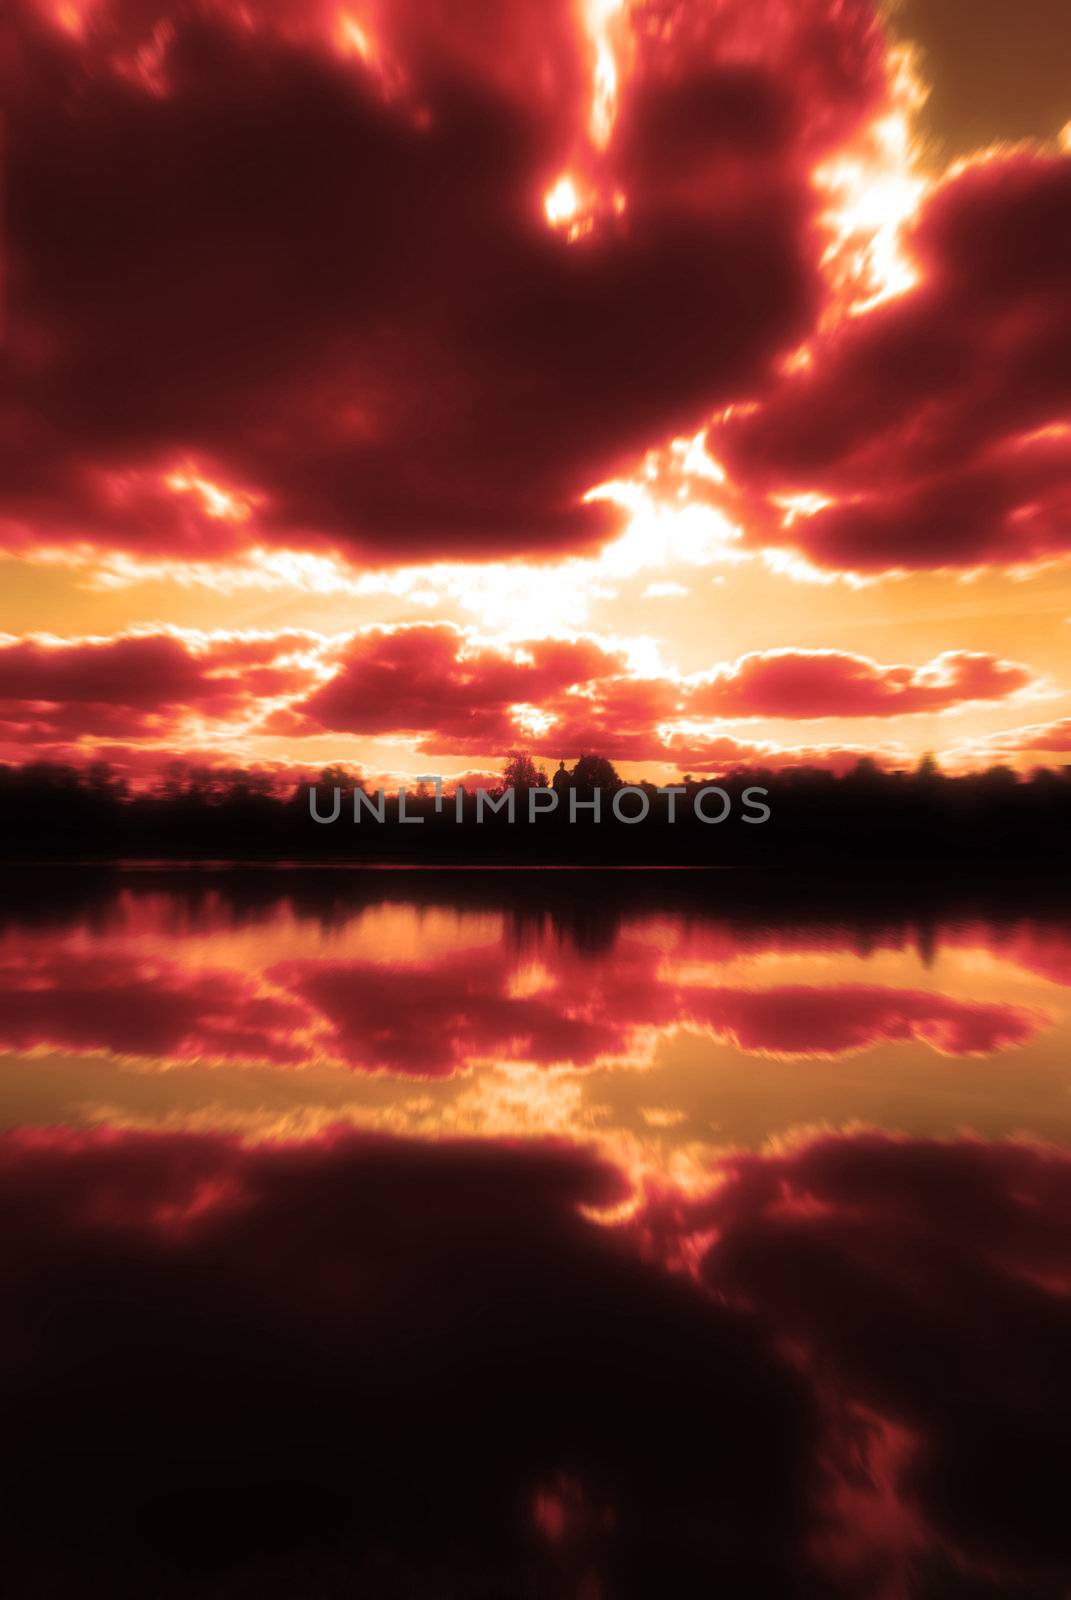 Sunset over lake in a city. The big clouds are reflected in water